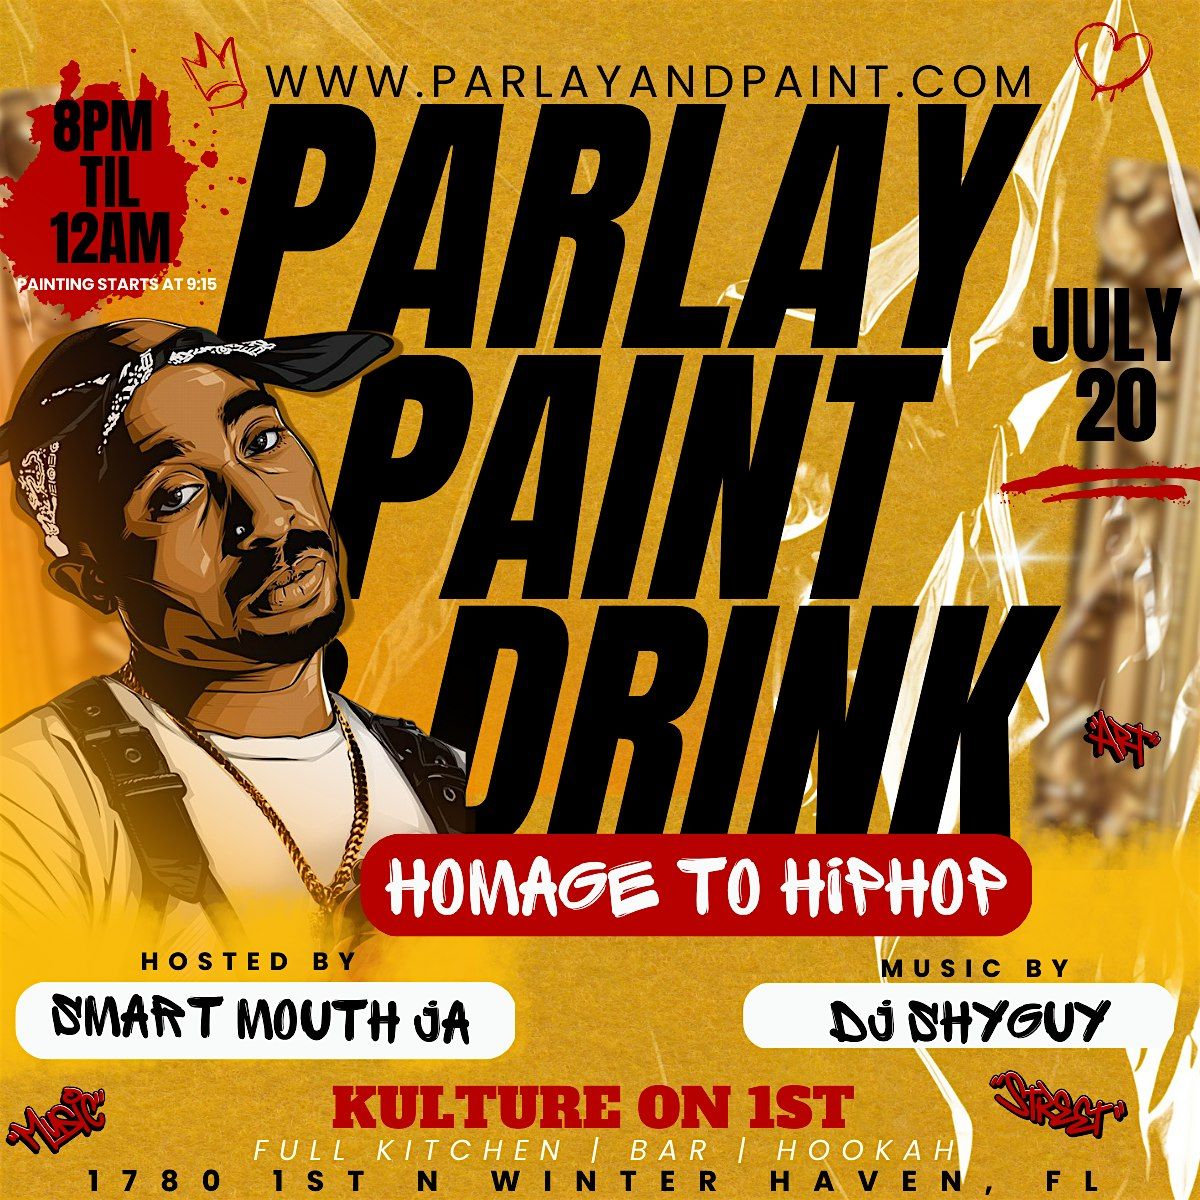 Parlay Paint & Drink Homage To HipHop